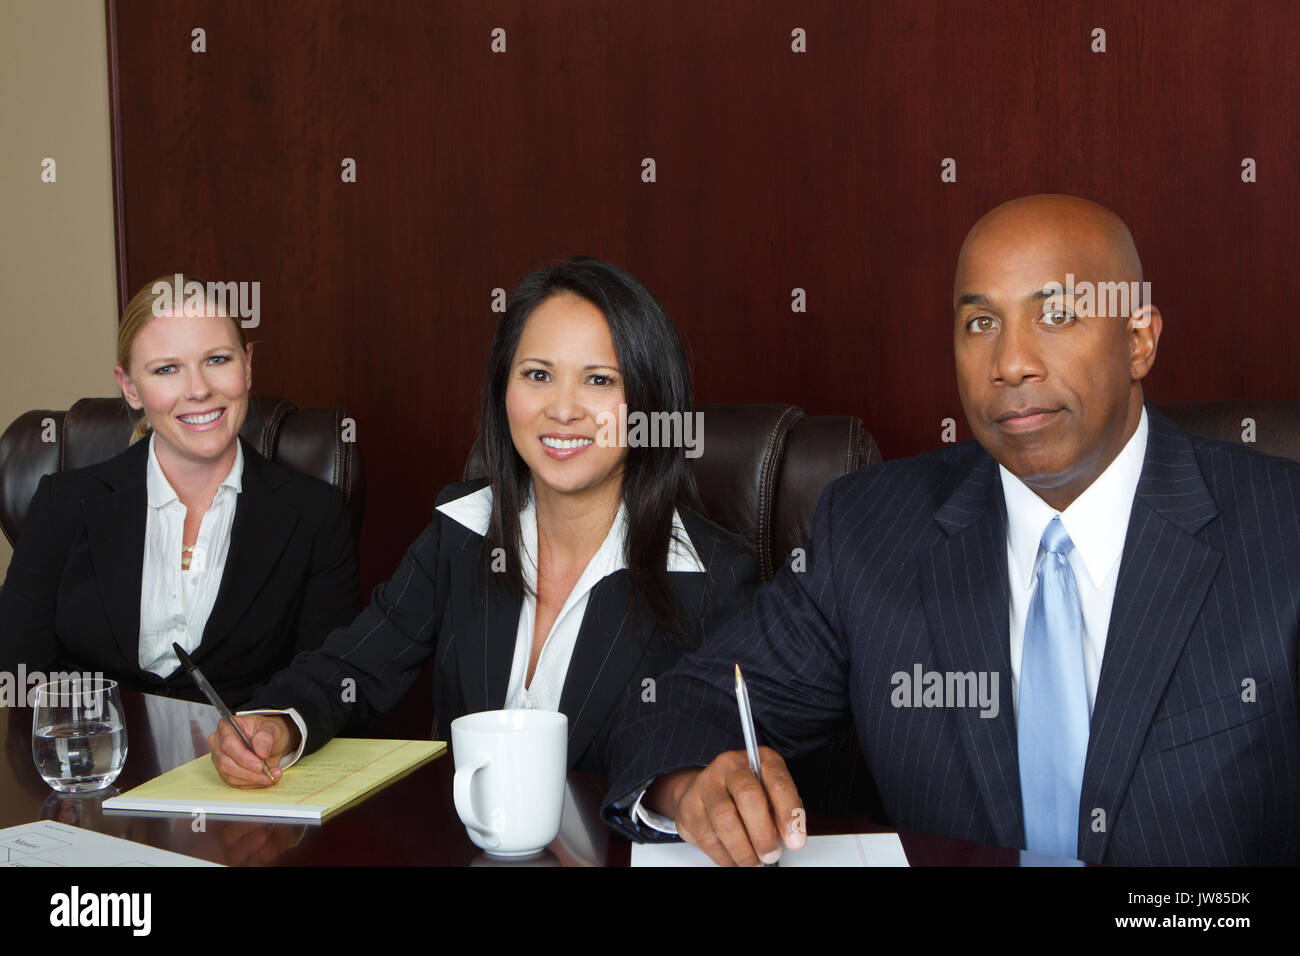 Divese group of business people. Stock Photo